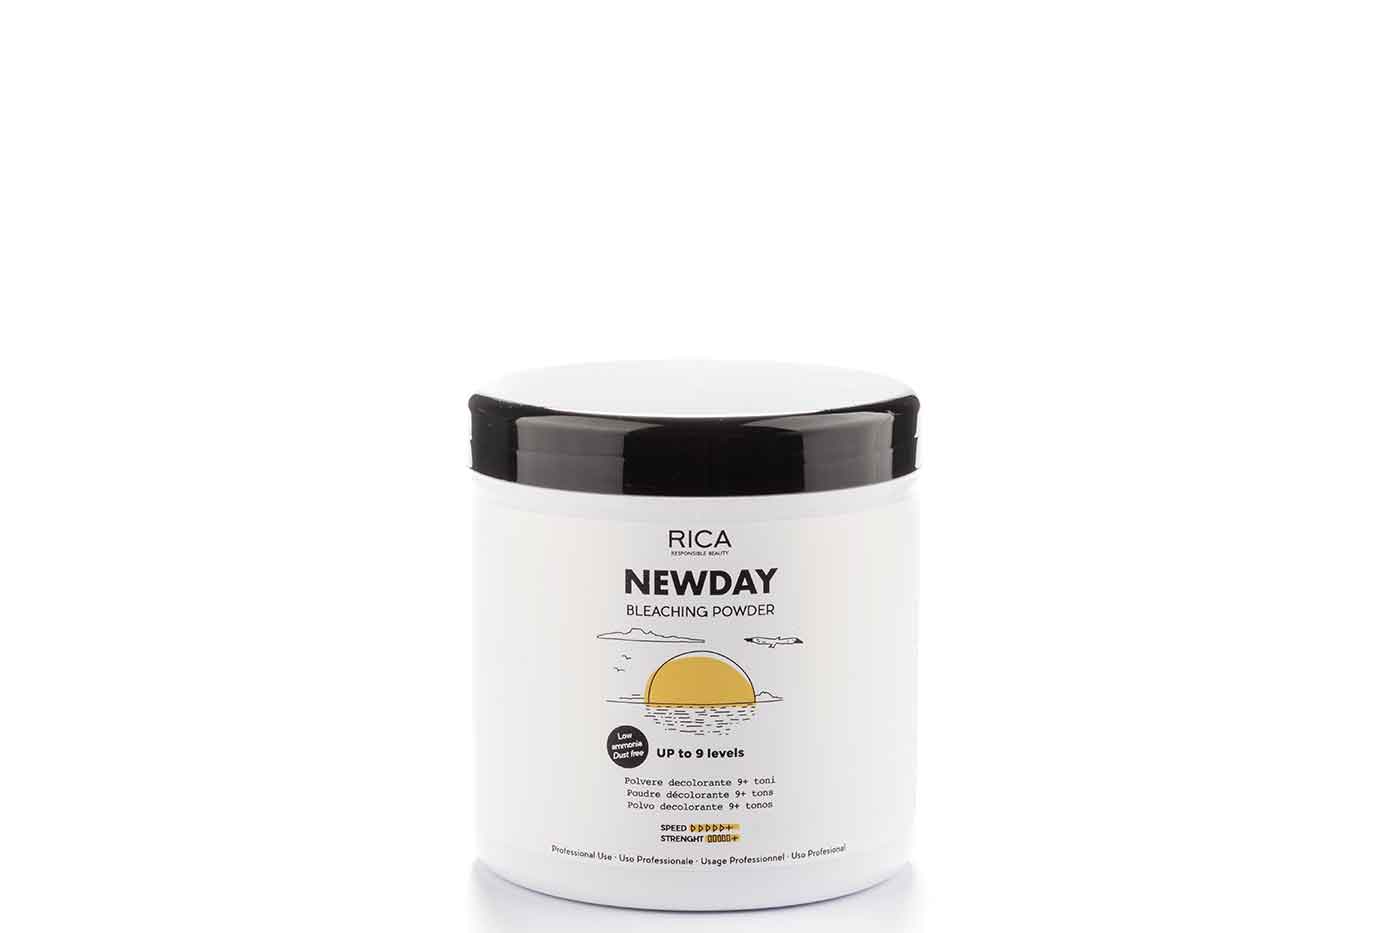 Give your client’s hair a new look with Rica’s Newday Bleaching Powder